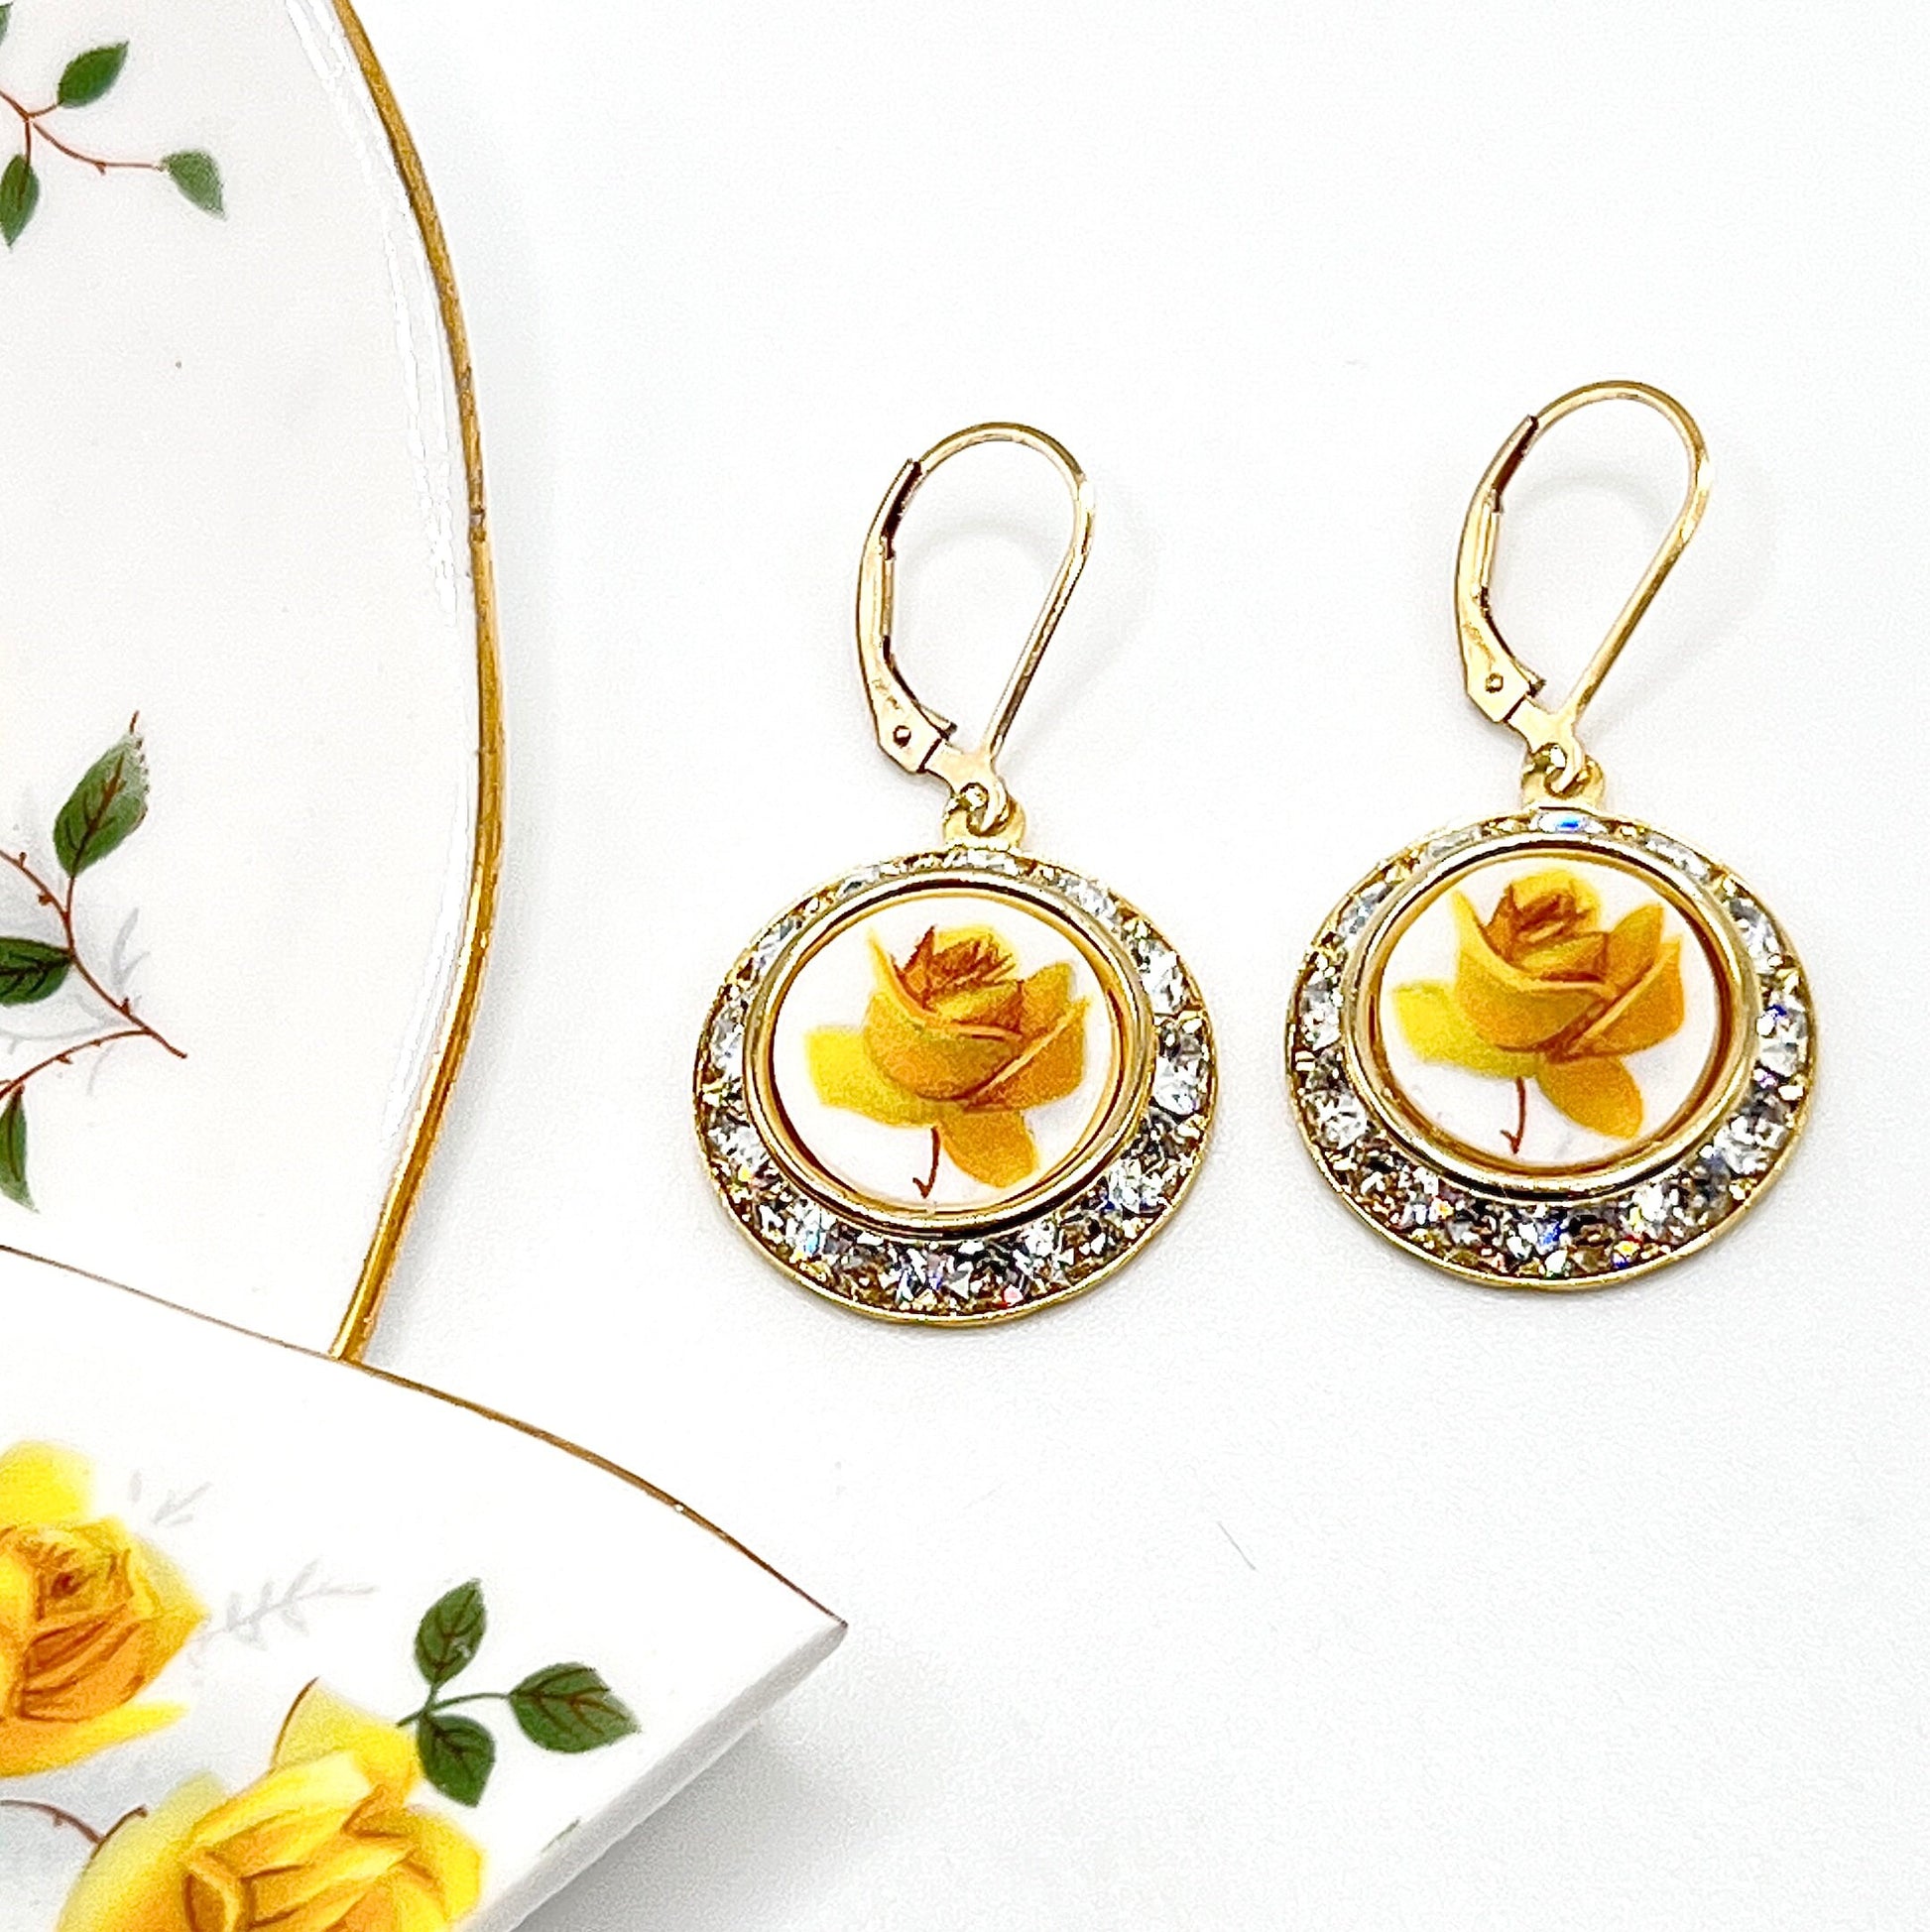 Gold Crystal Earrings, Victorian Yellow Rose Earrings, Broken China Jewelry Crystal Jewelry, Yellow Wedding